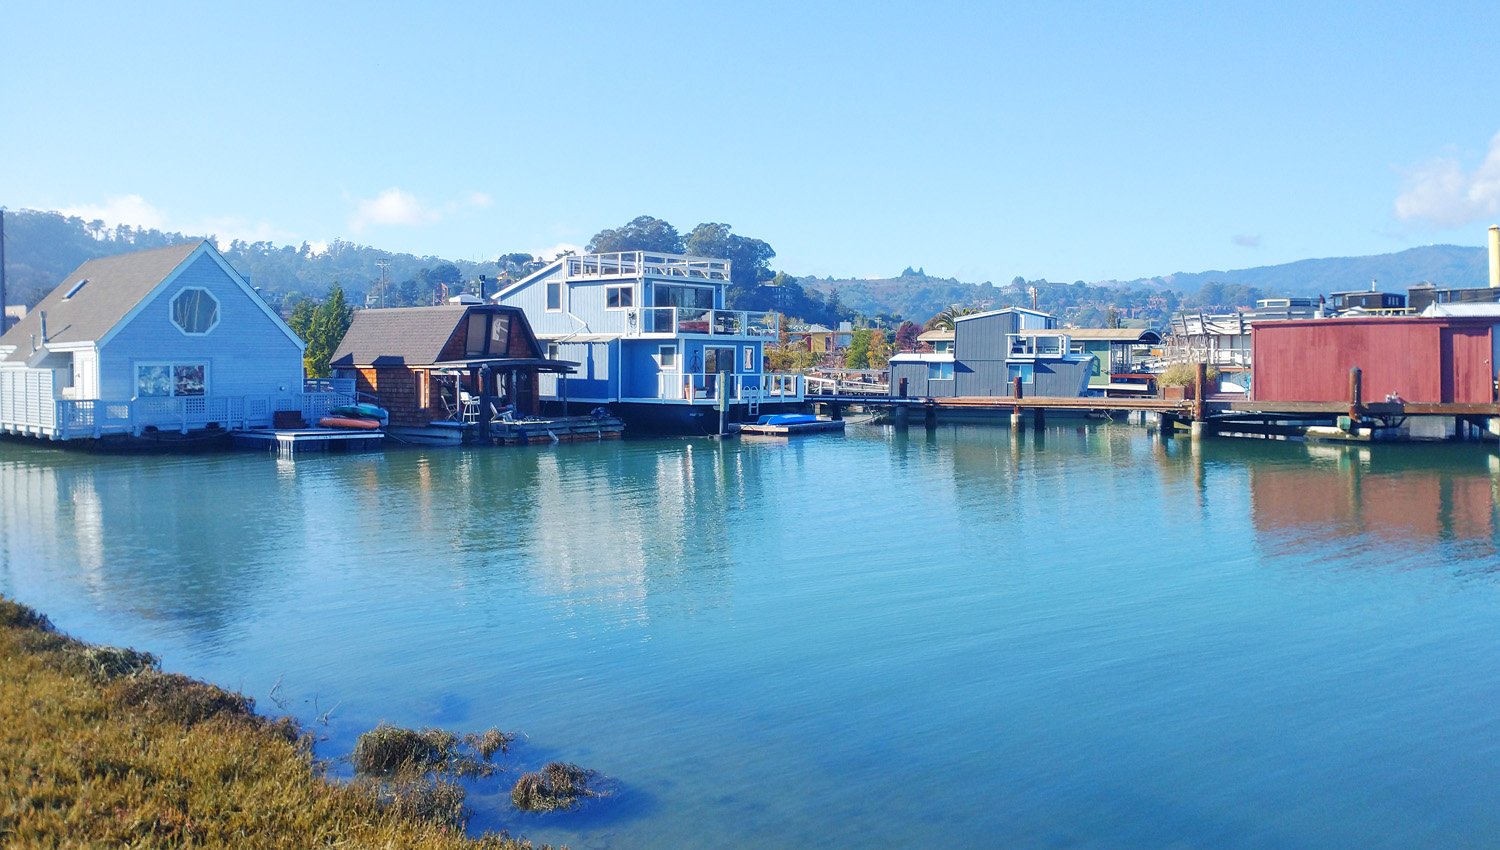 Some people living in house boats in Sausalito.